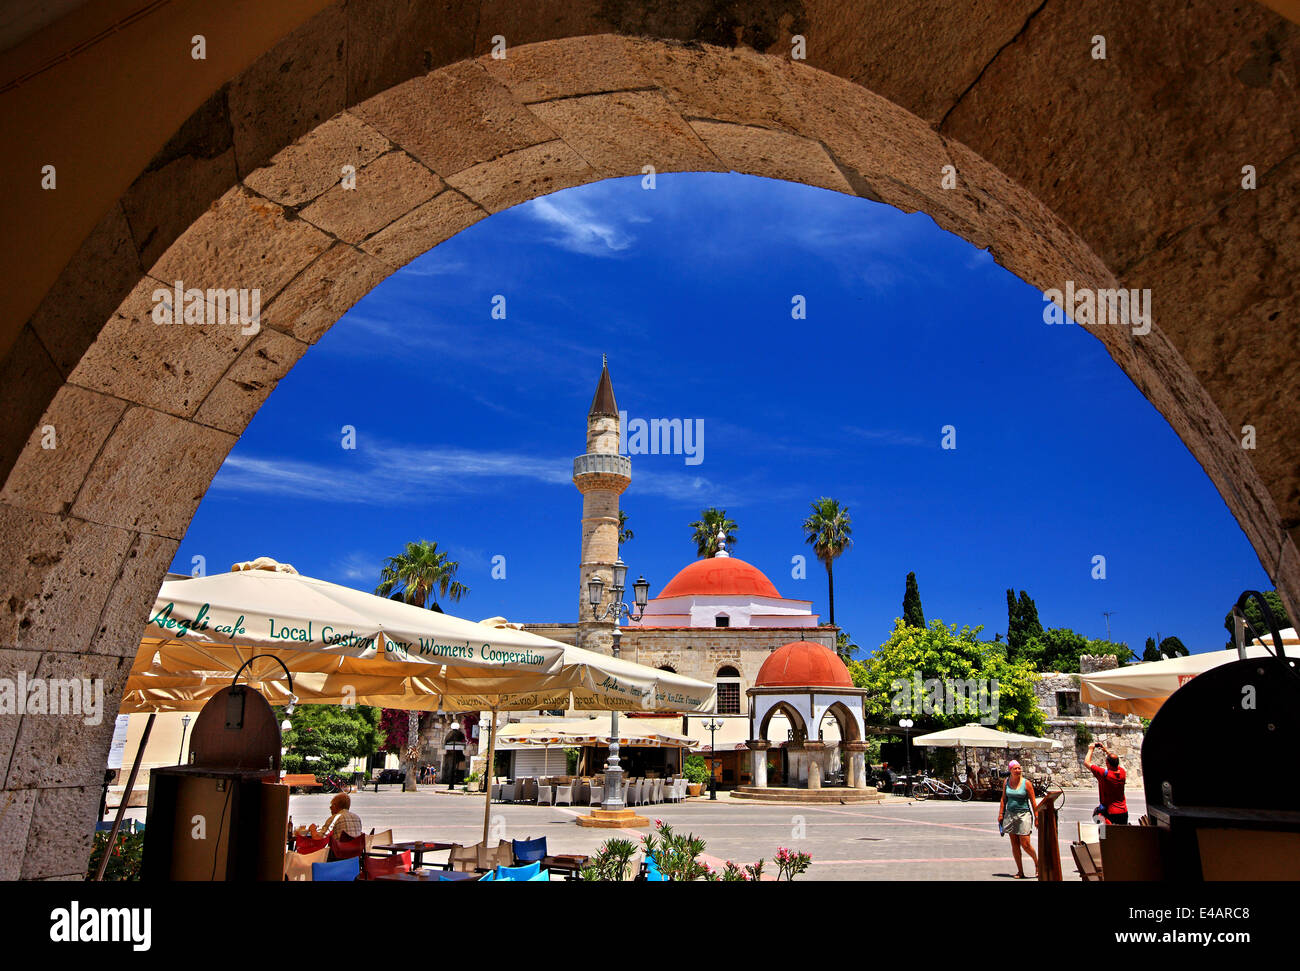 The Defterdar mosque, seen 'through' the arch of an 'Italian' building, At Eleftherias square, Kos island, Dodecanese, Greece Stock Photo